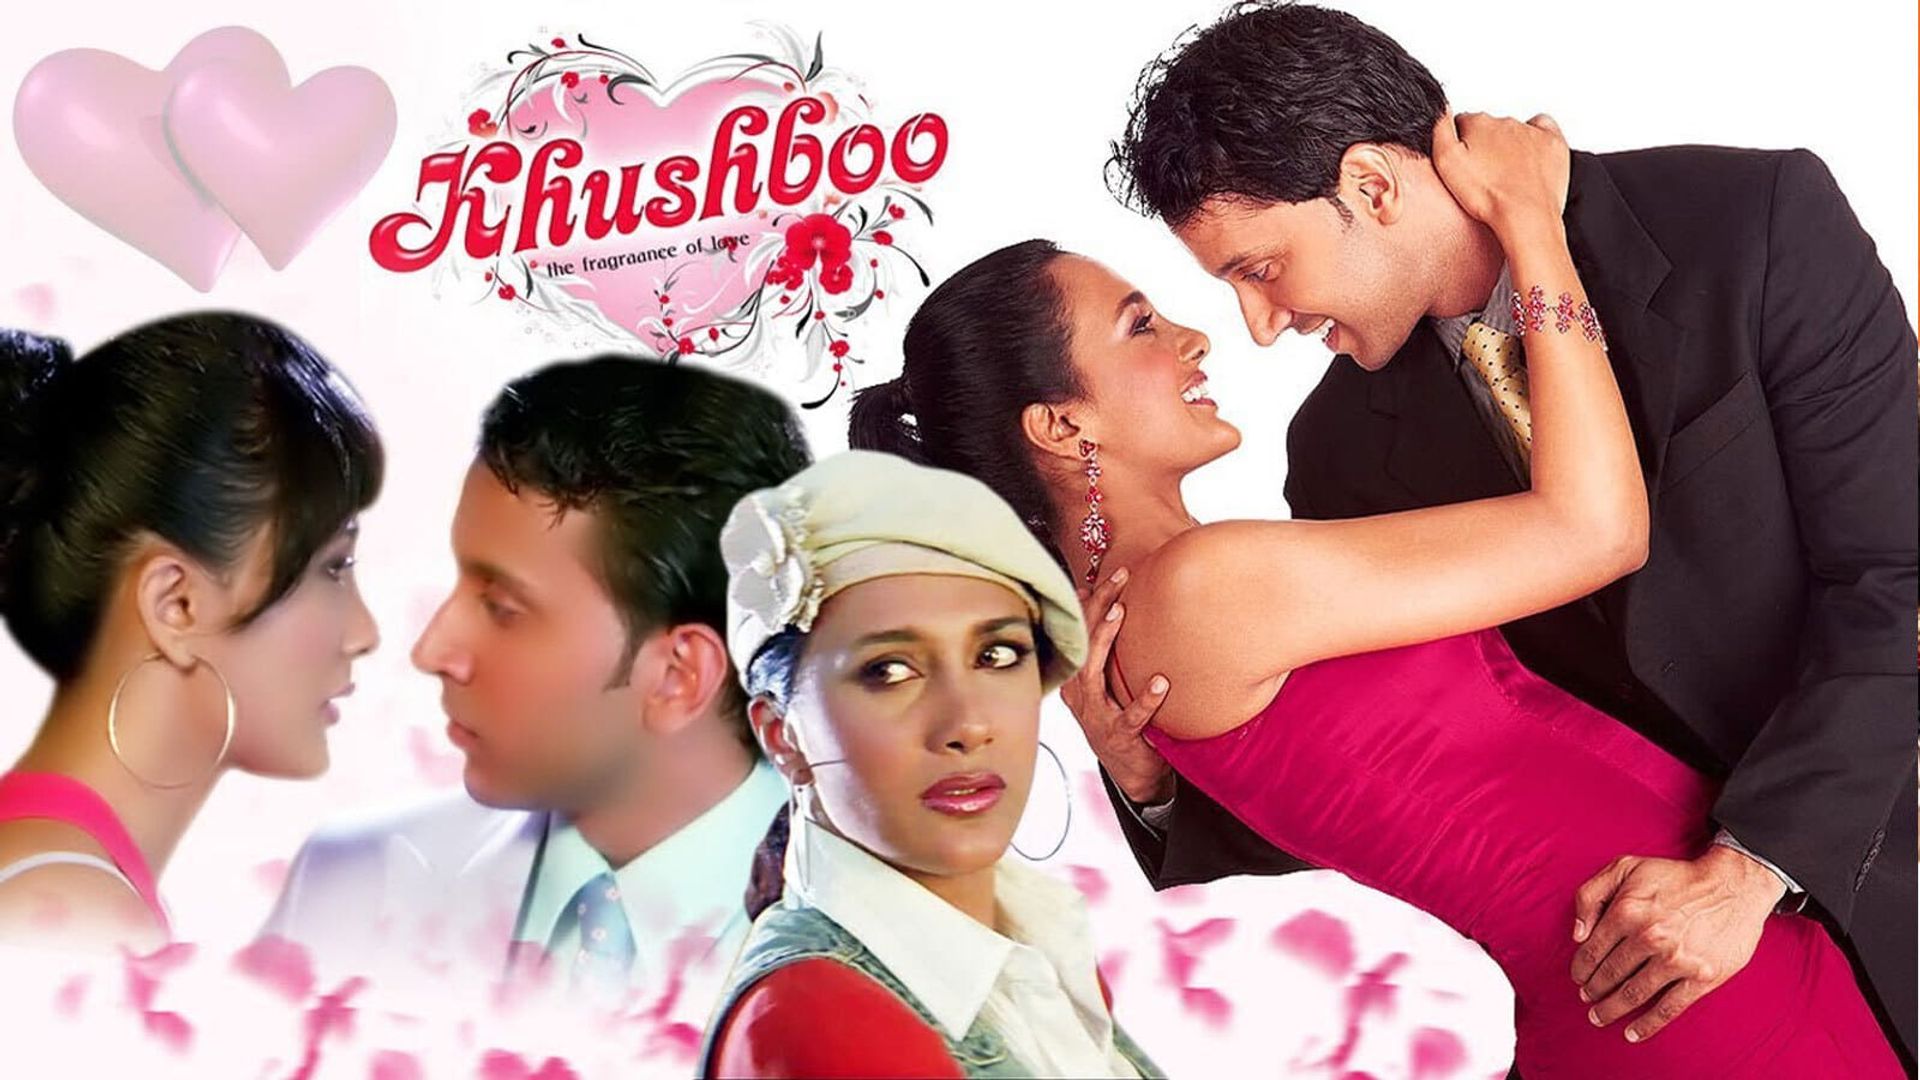 Khushboo: The Fragraance of Love background